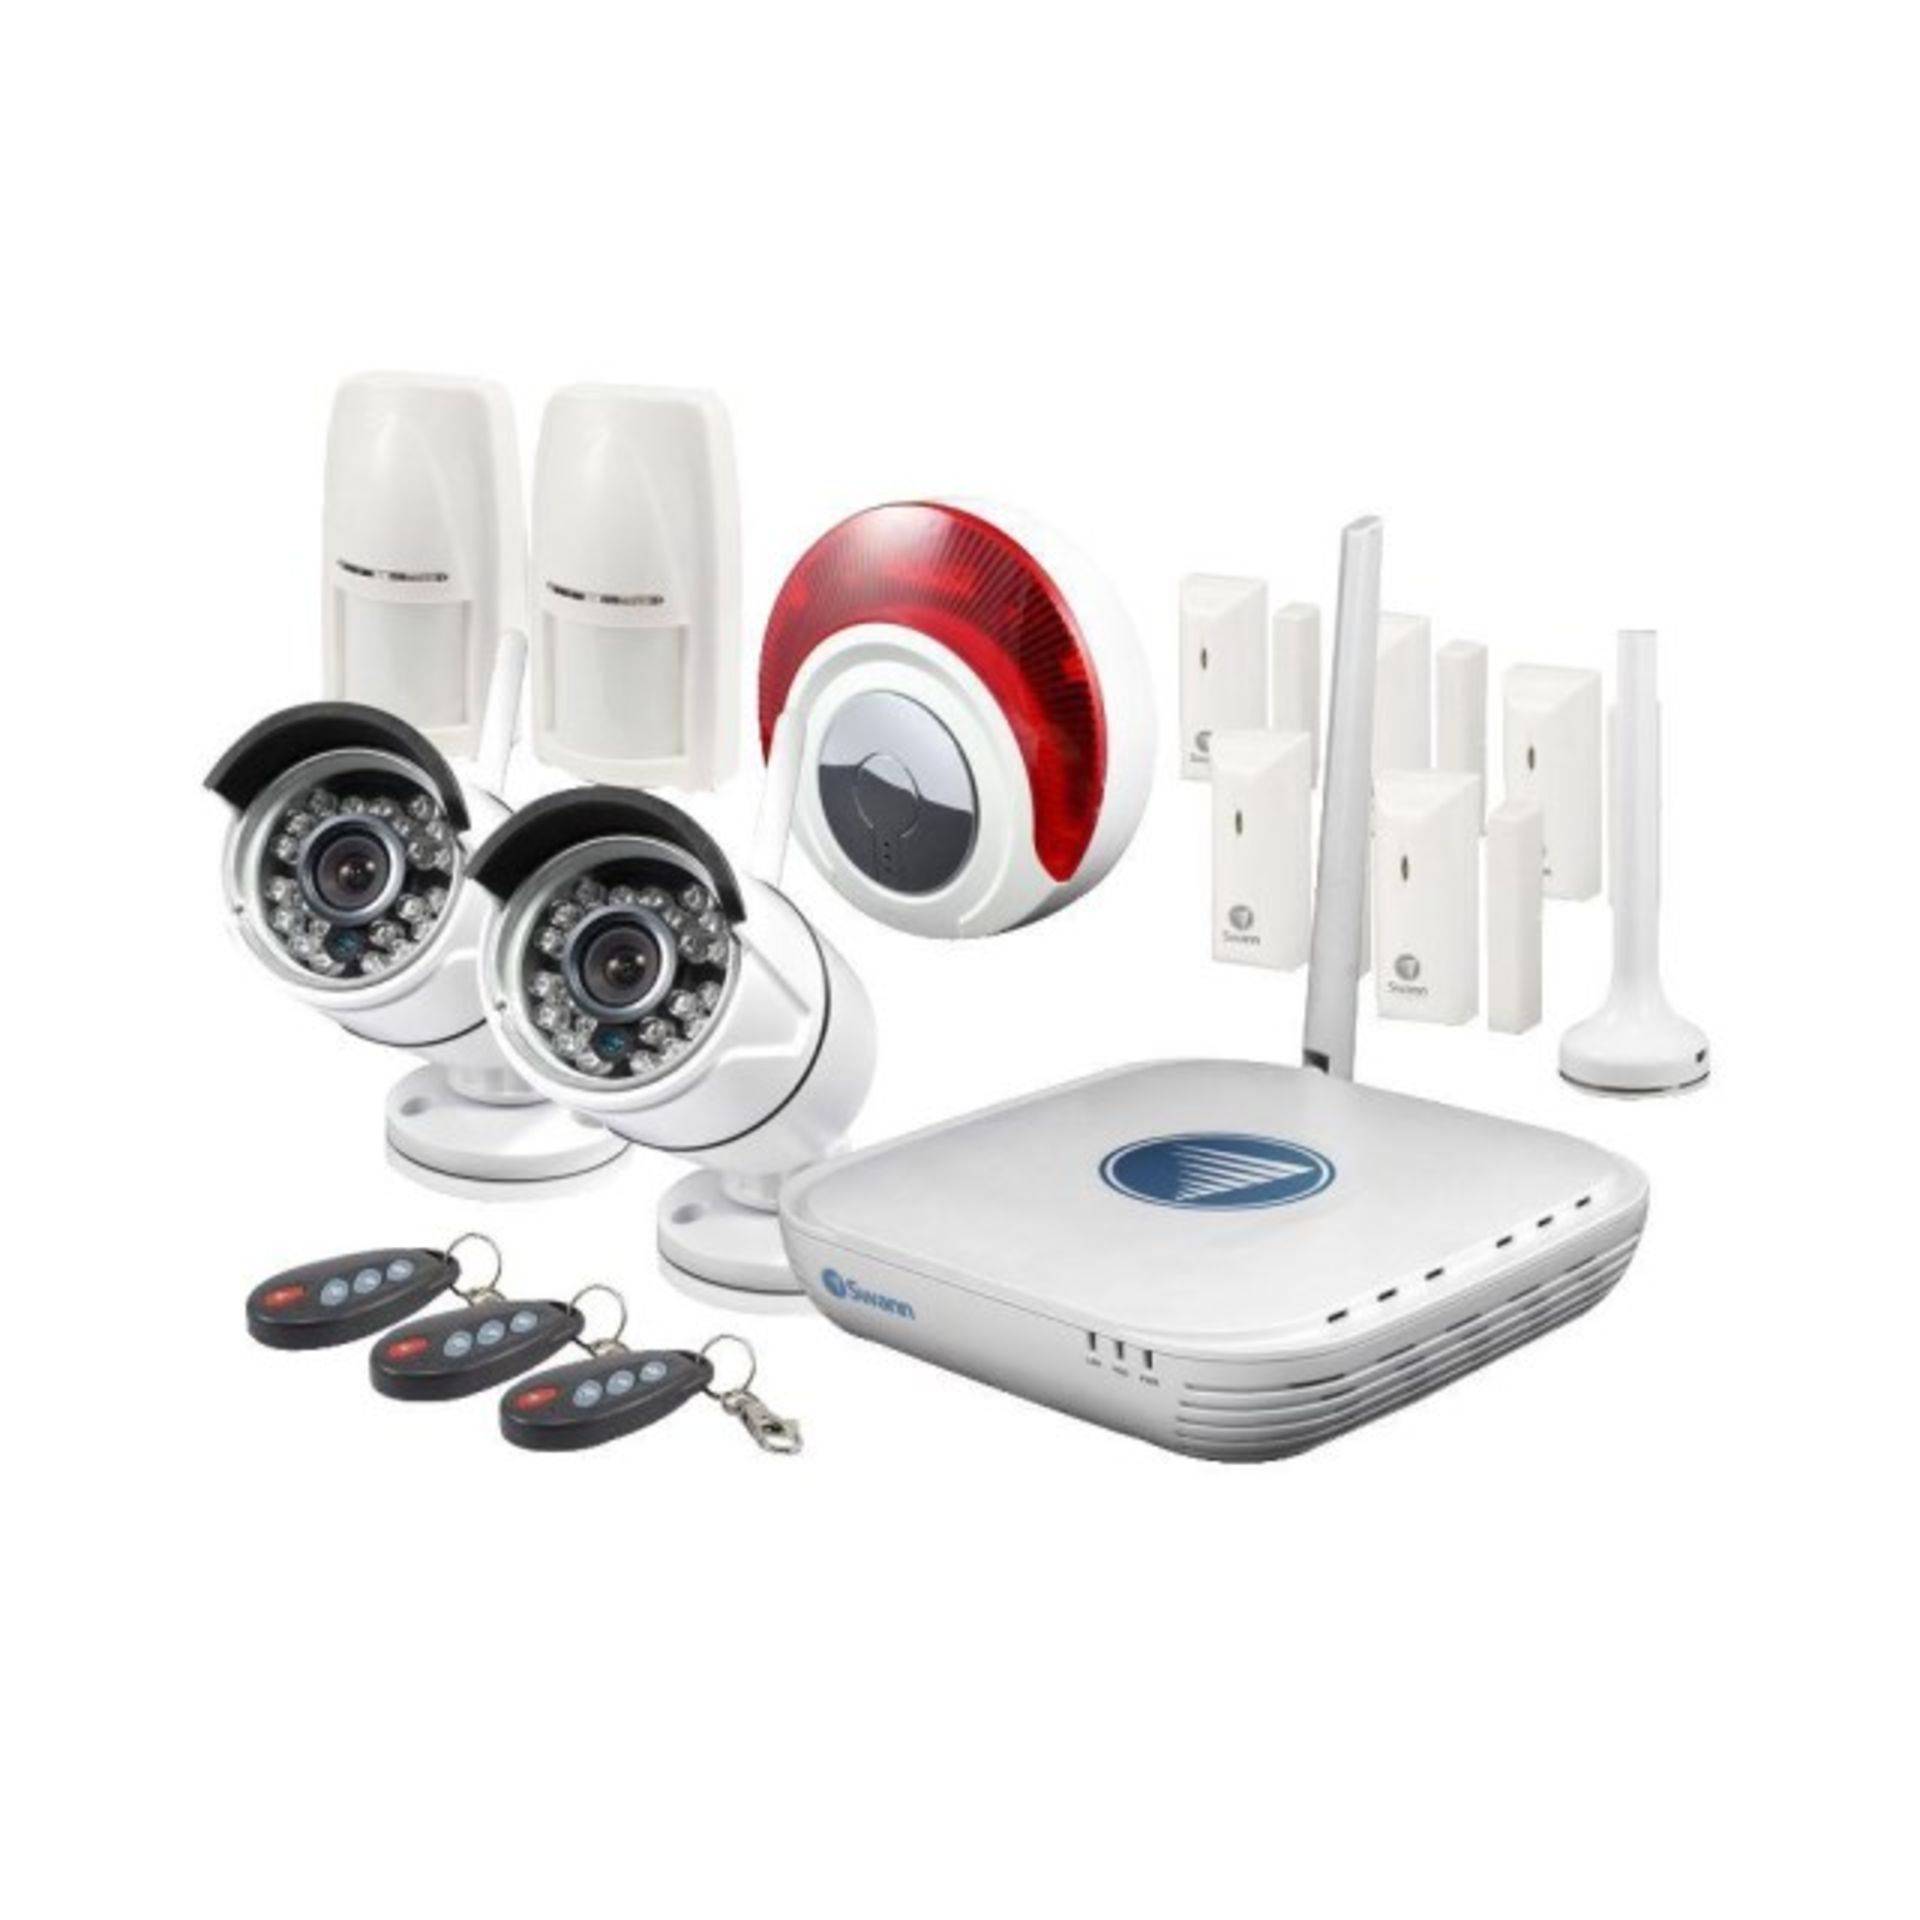 V *TRADE QTY* Brand New Swann HD Micro Wifi Video and Alarm Security Kit (Screwfix £499.99) Complete